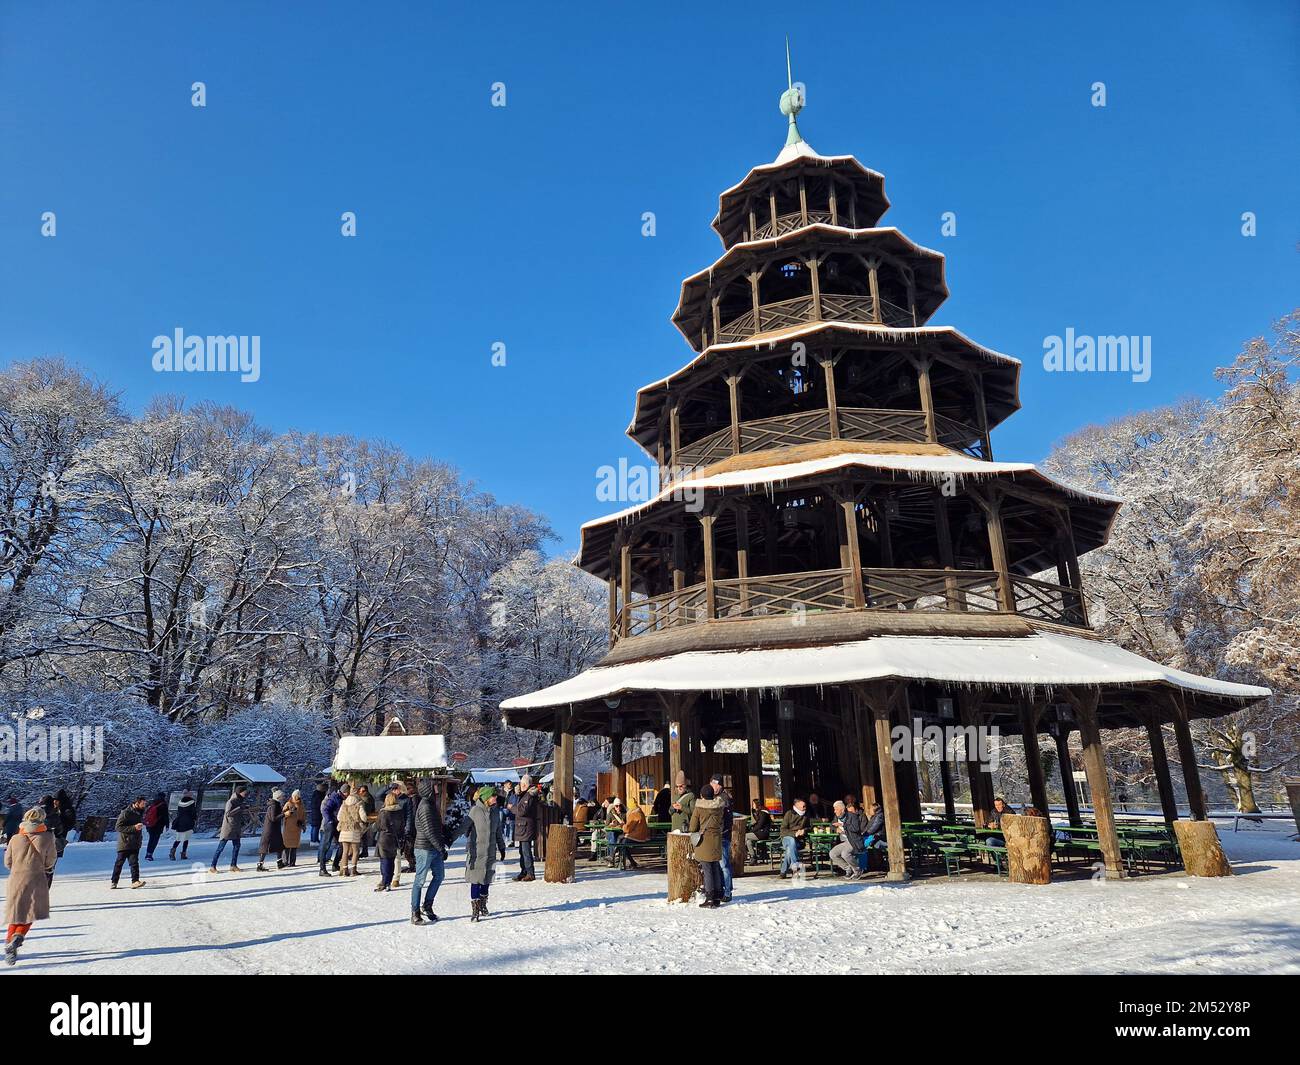 Christmas markets in the snow at Chinesischer Turm in Munich, Germany Stock Photo